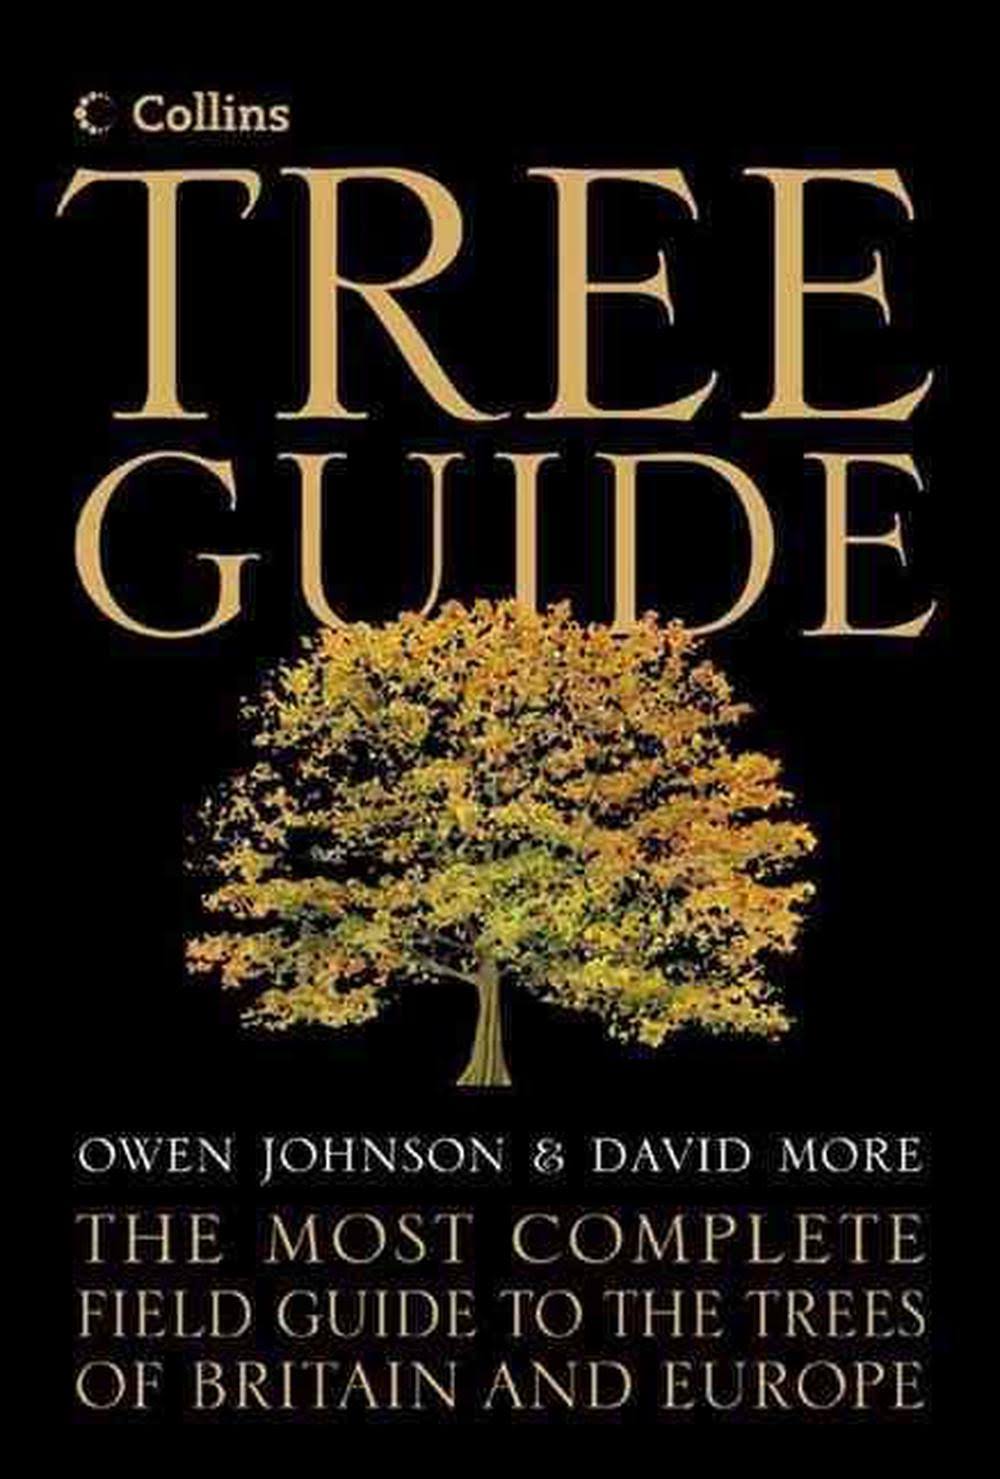 Collins Tree Guide by David More